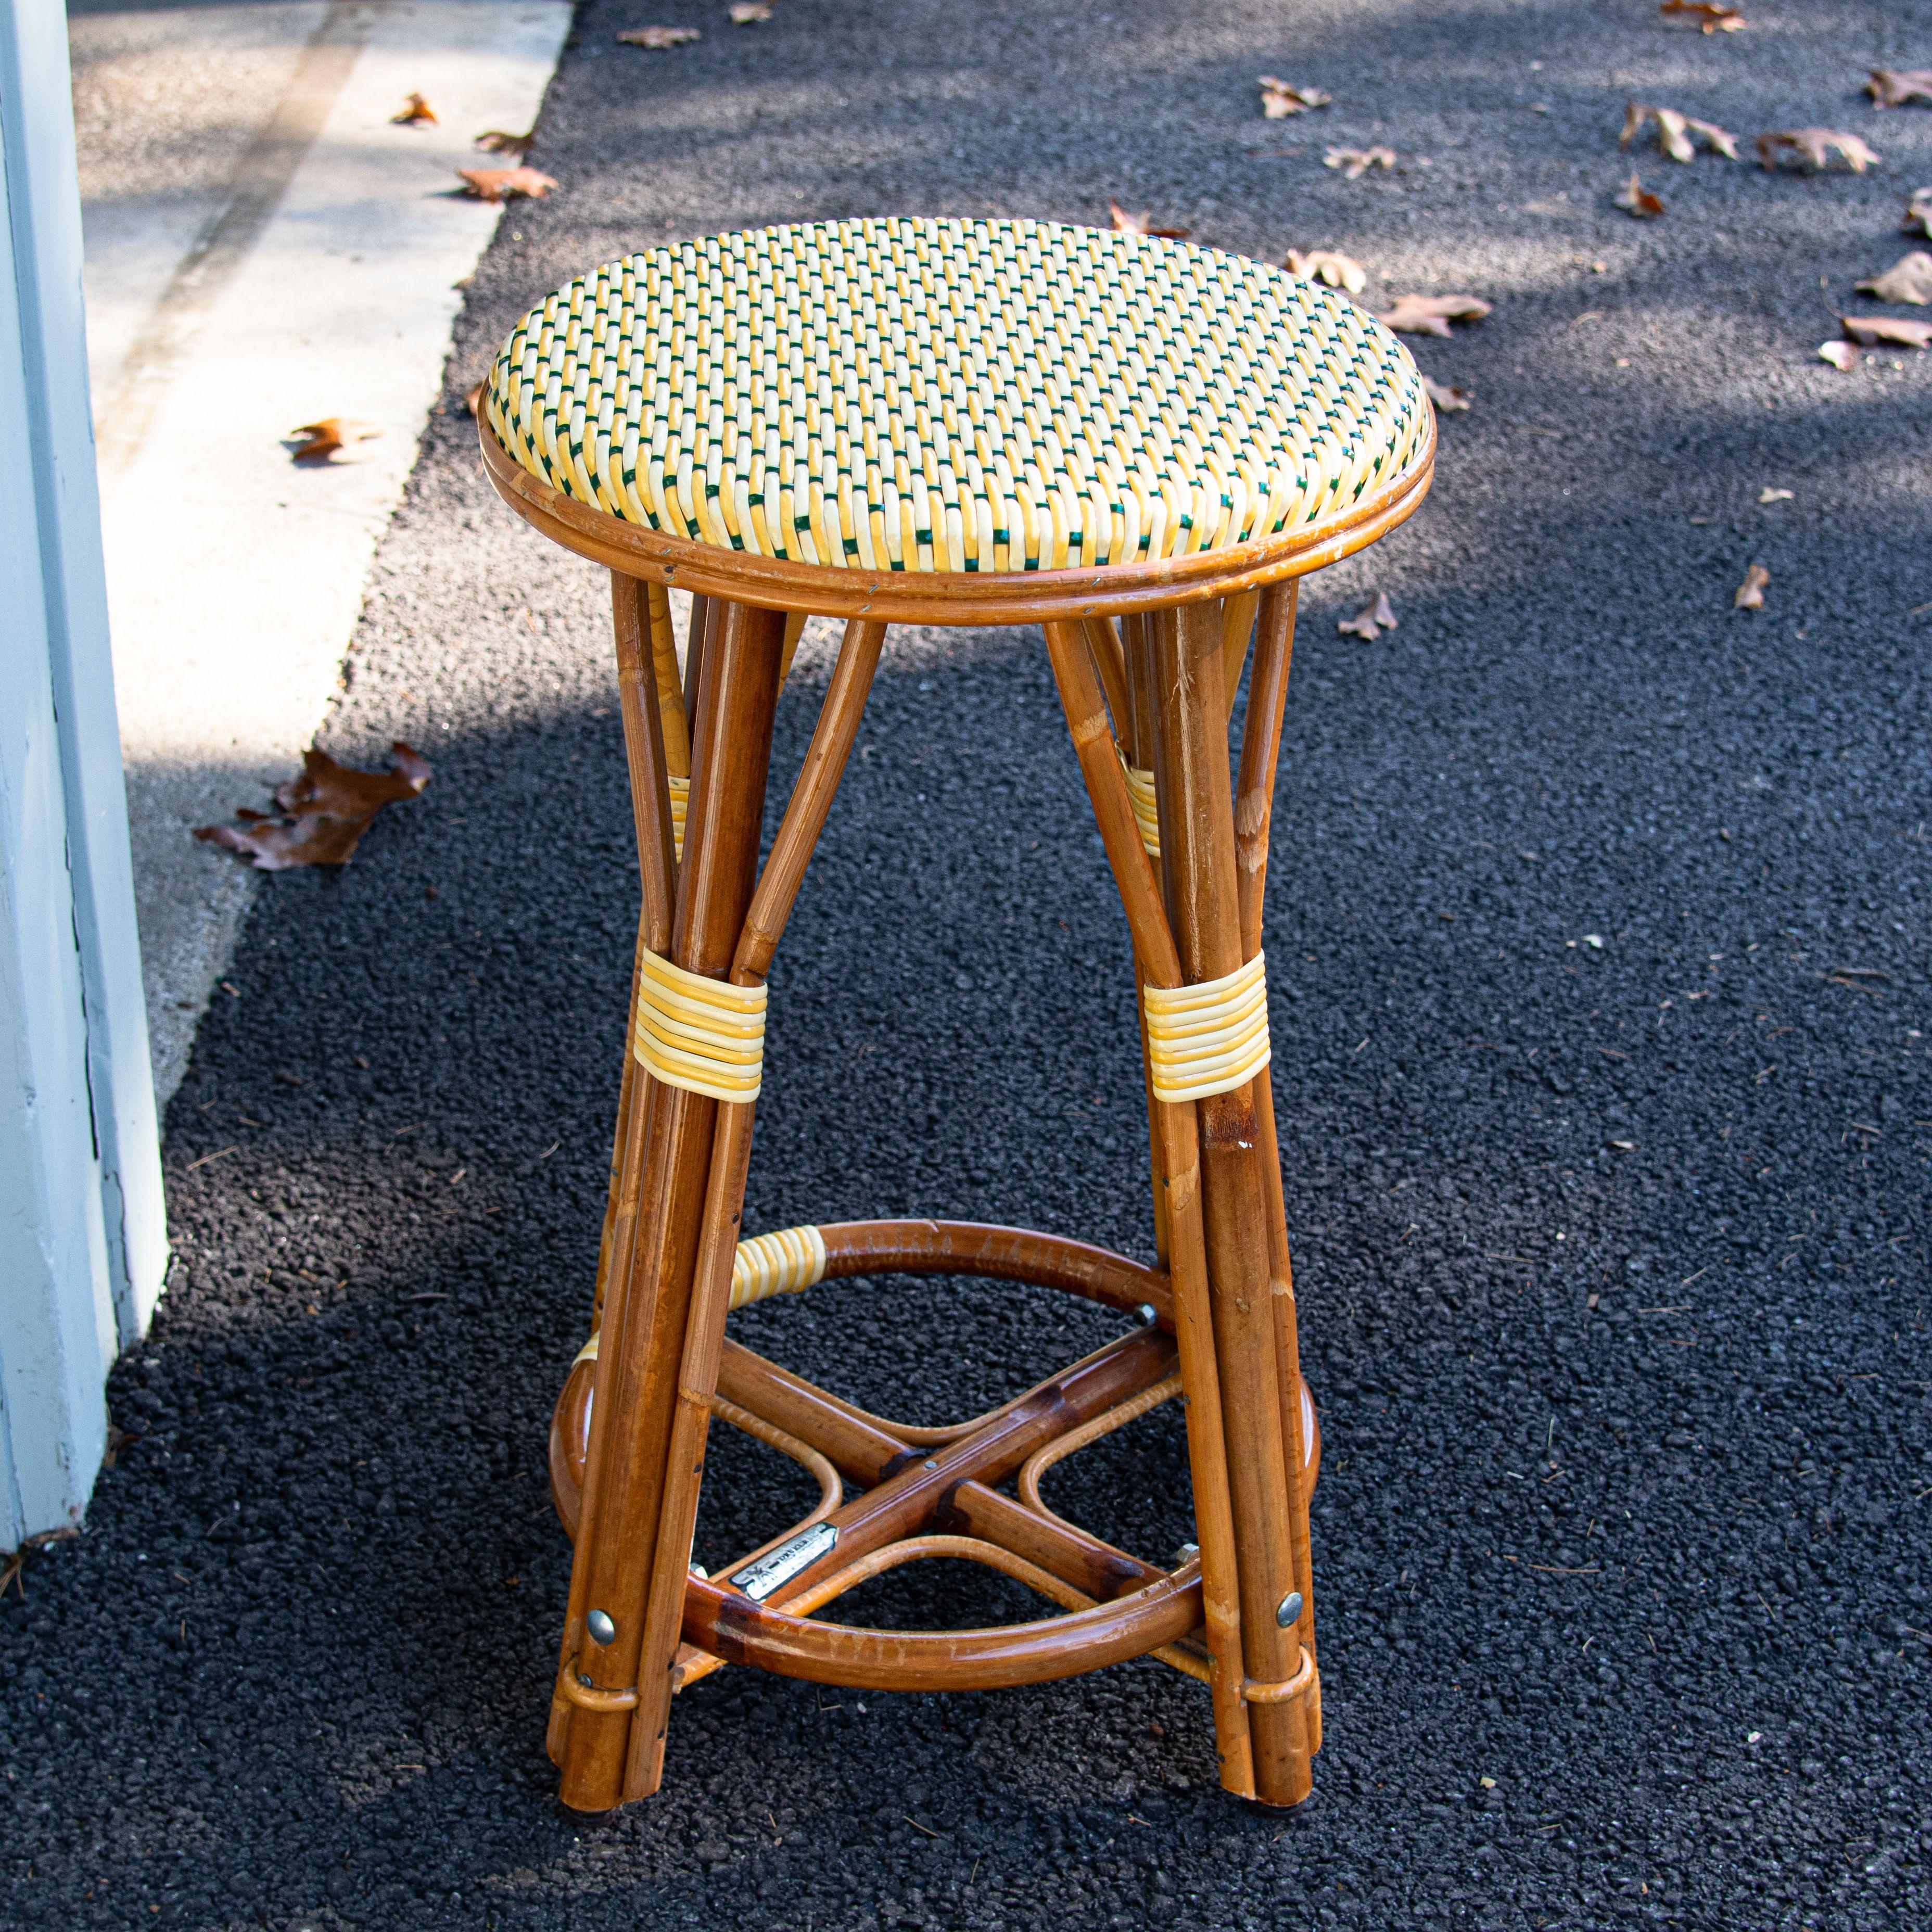 Classic Parisian backless stools. The rattan frame is crafted in a time-honored technique perfected by the French, bent and shaped by hand until the iconic shape is achieved and the rattan’s subtle variations enhance the beauty of the weave for a